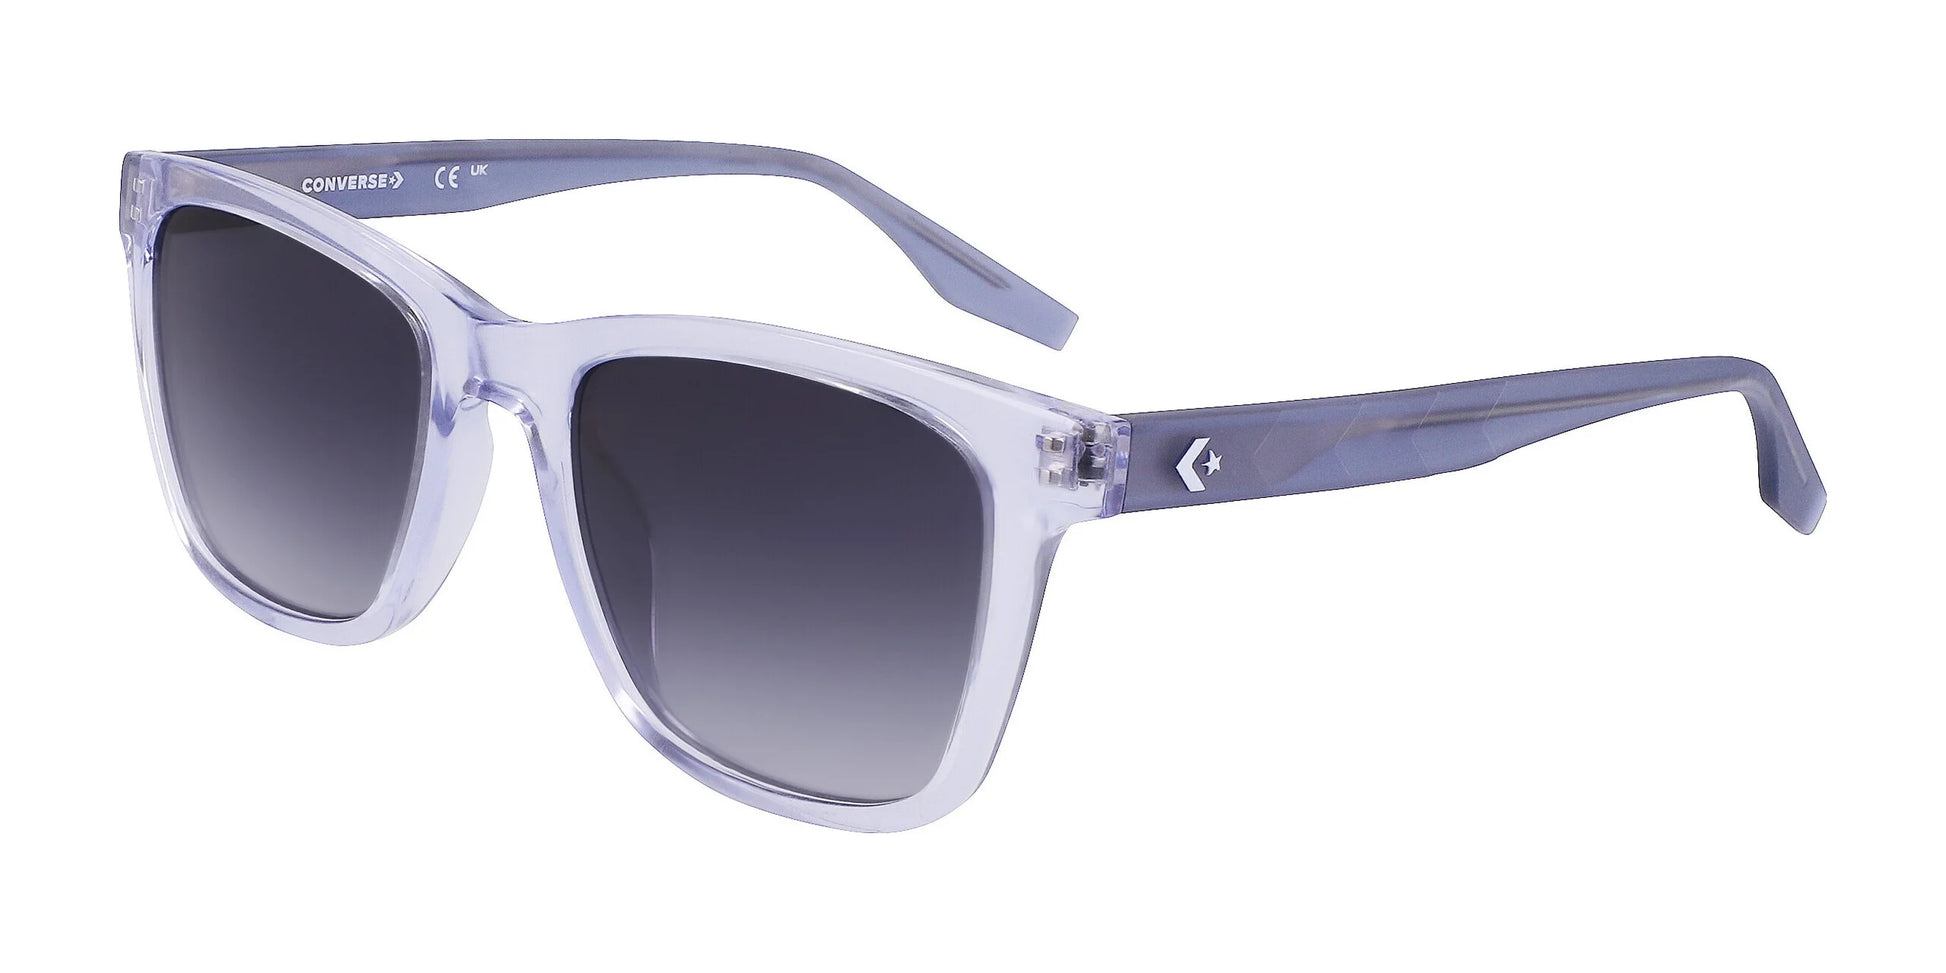 Converse CV542S ADVANCE Sunglasses Crystal Ghosted